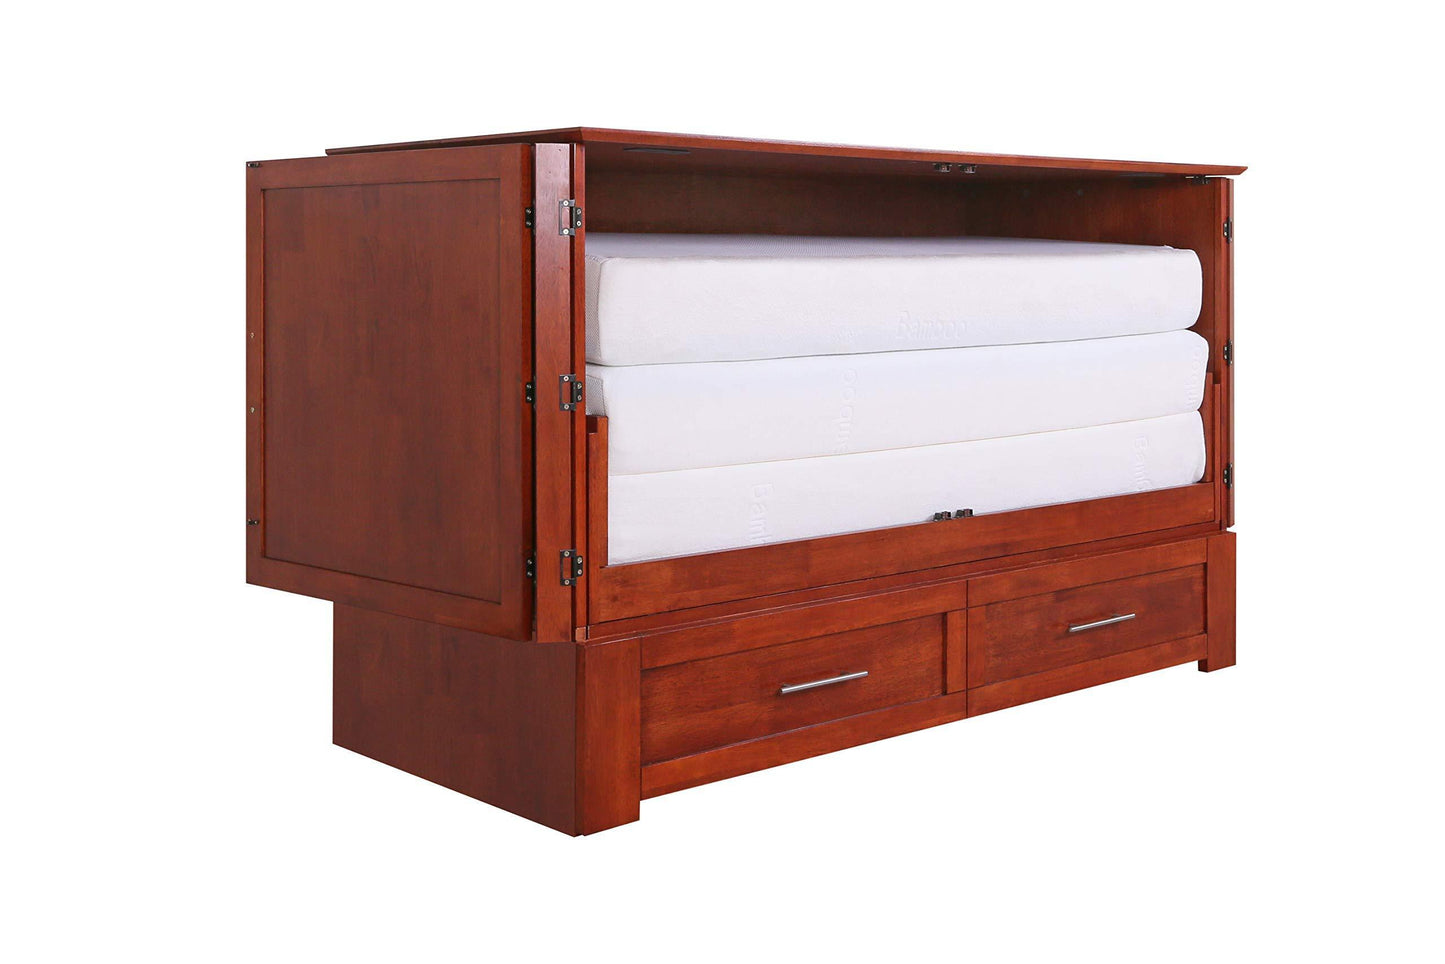 Selection emurphybed com daily delight charging station gel infused mattress solid wood murphy cabinet chest bed queen cherry